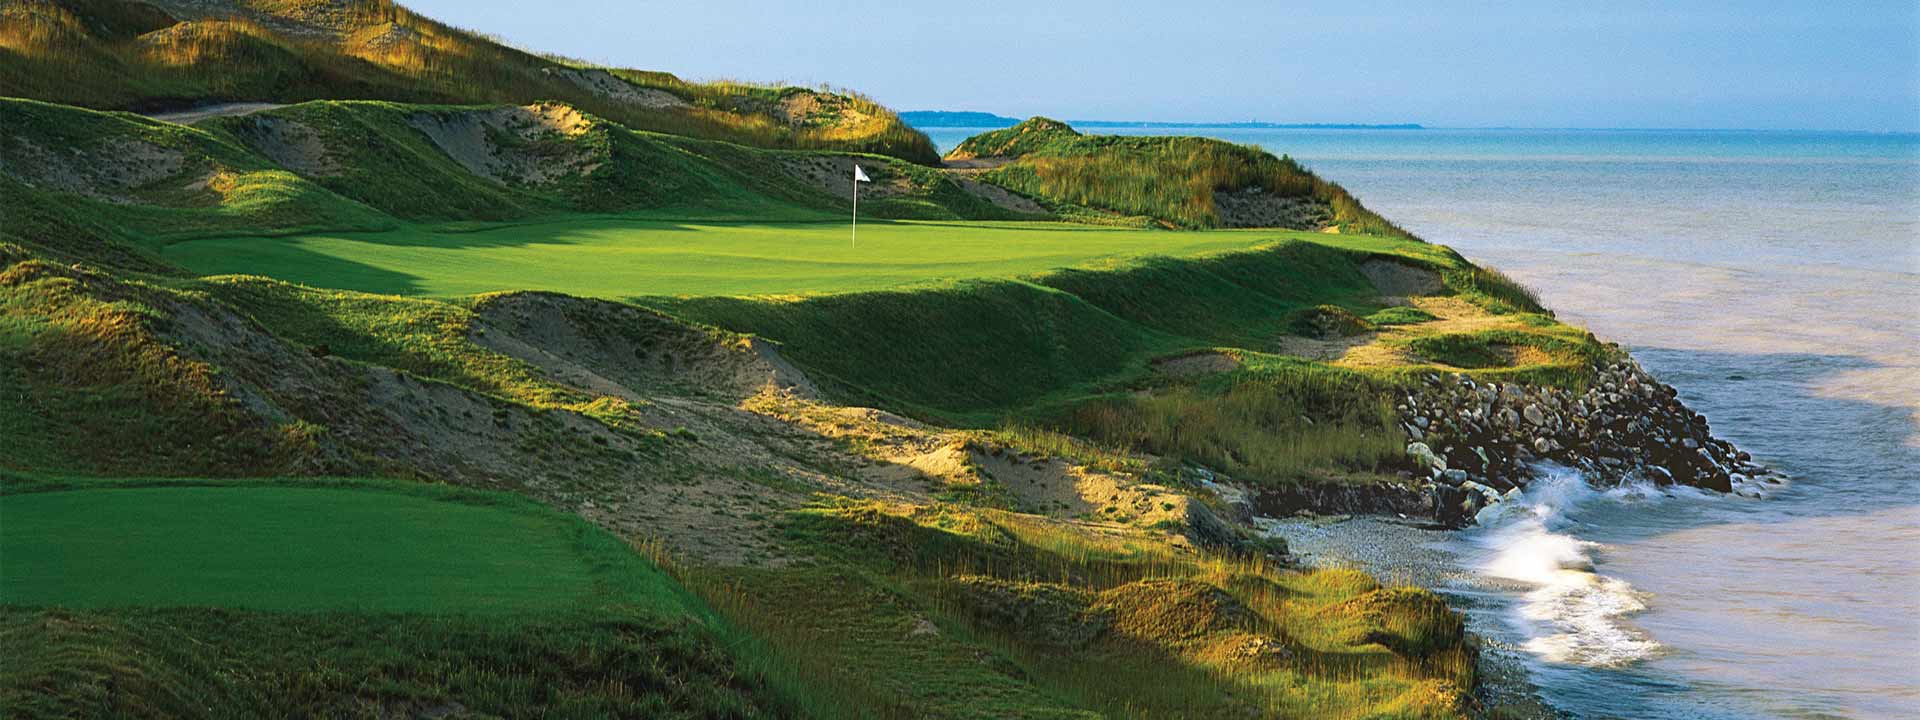 A view of one of the par-3s on the Straits course at Whistling Straits.